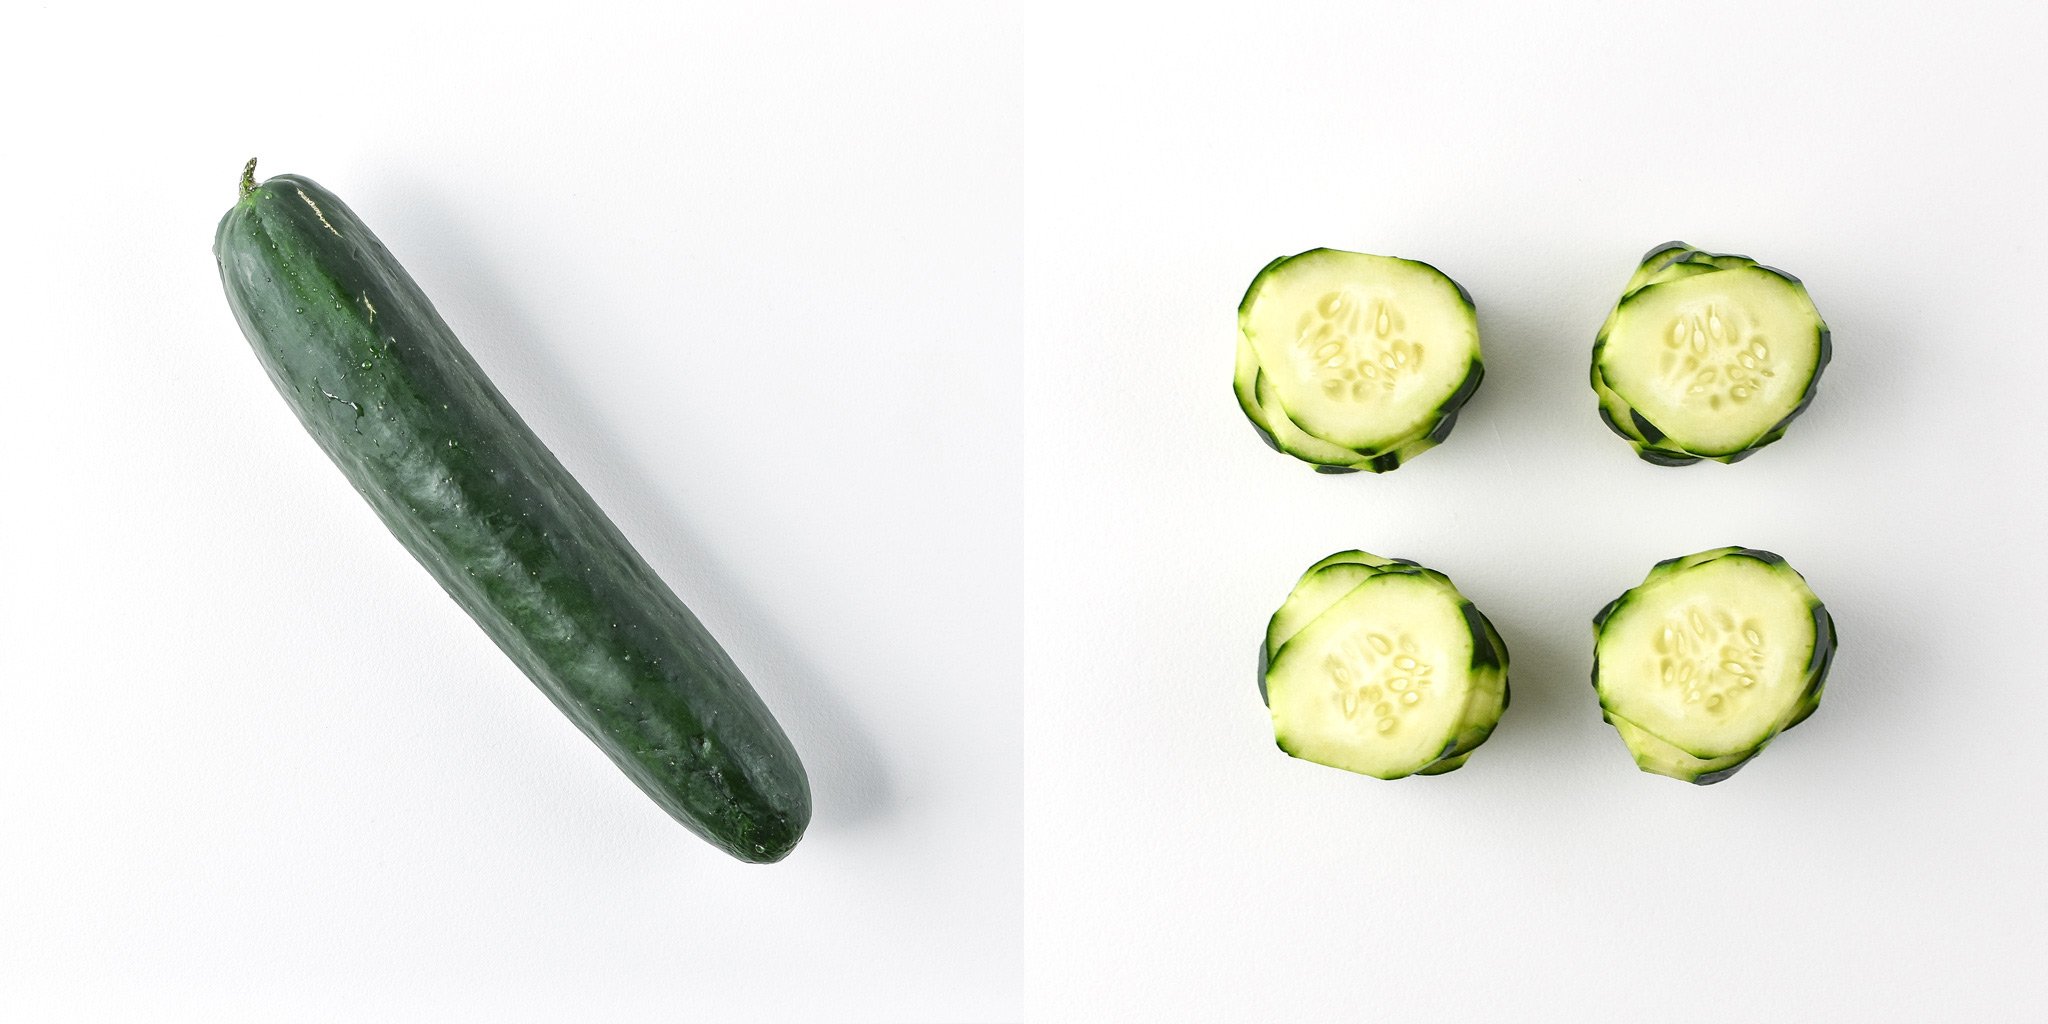 Cucumbers before and after preparing and portioning.